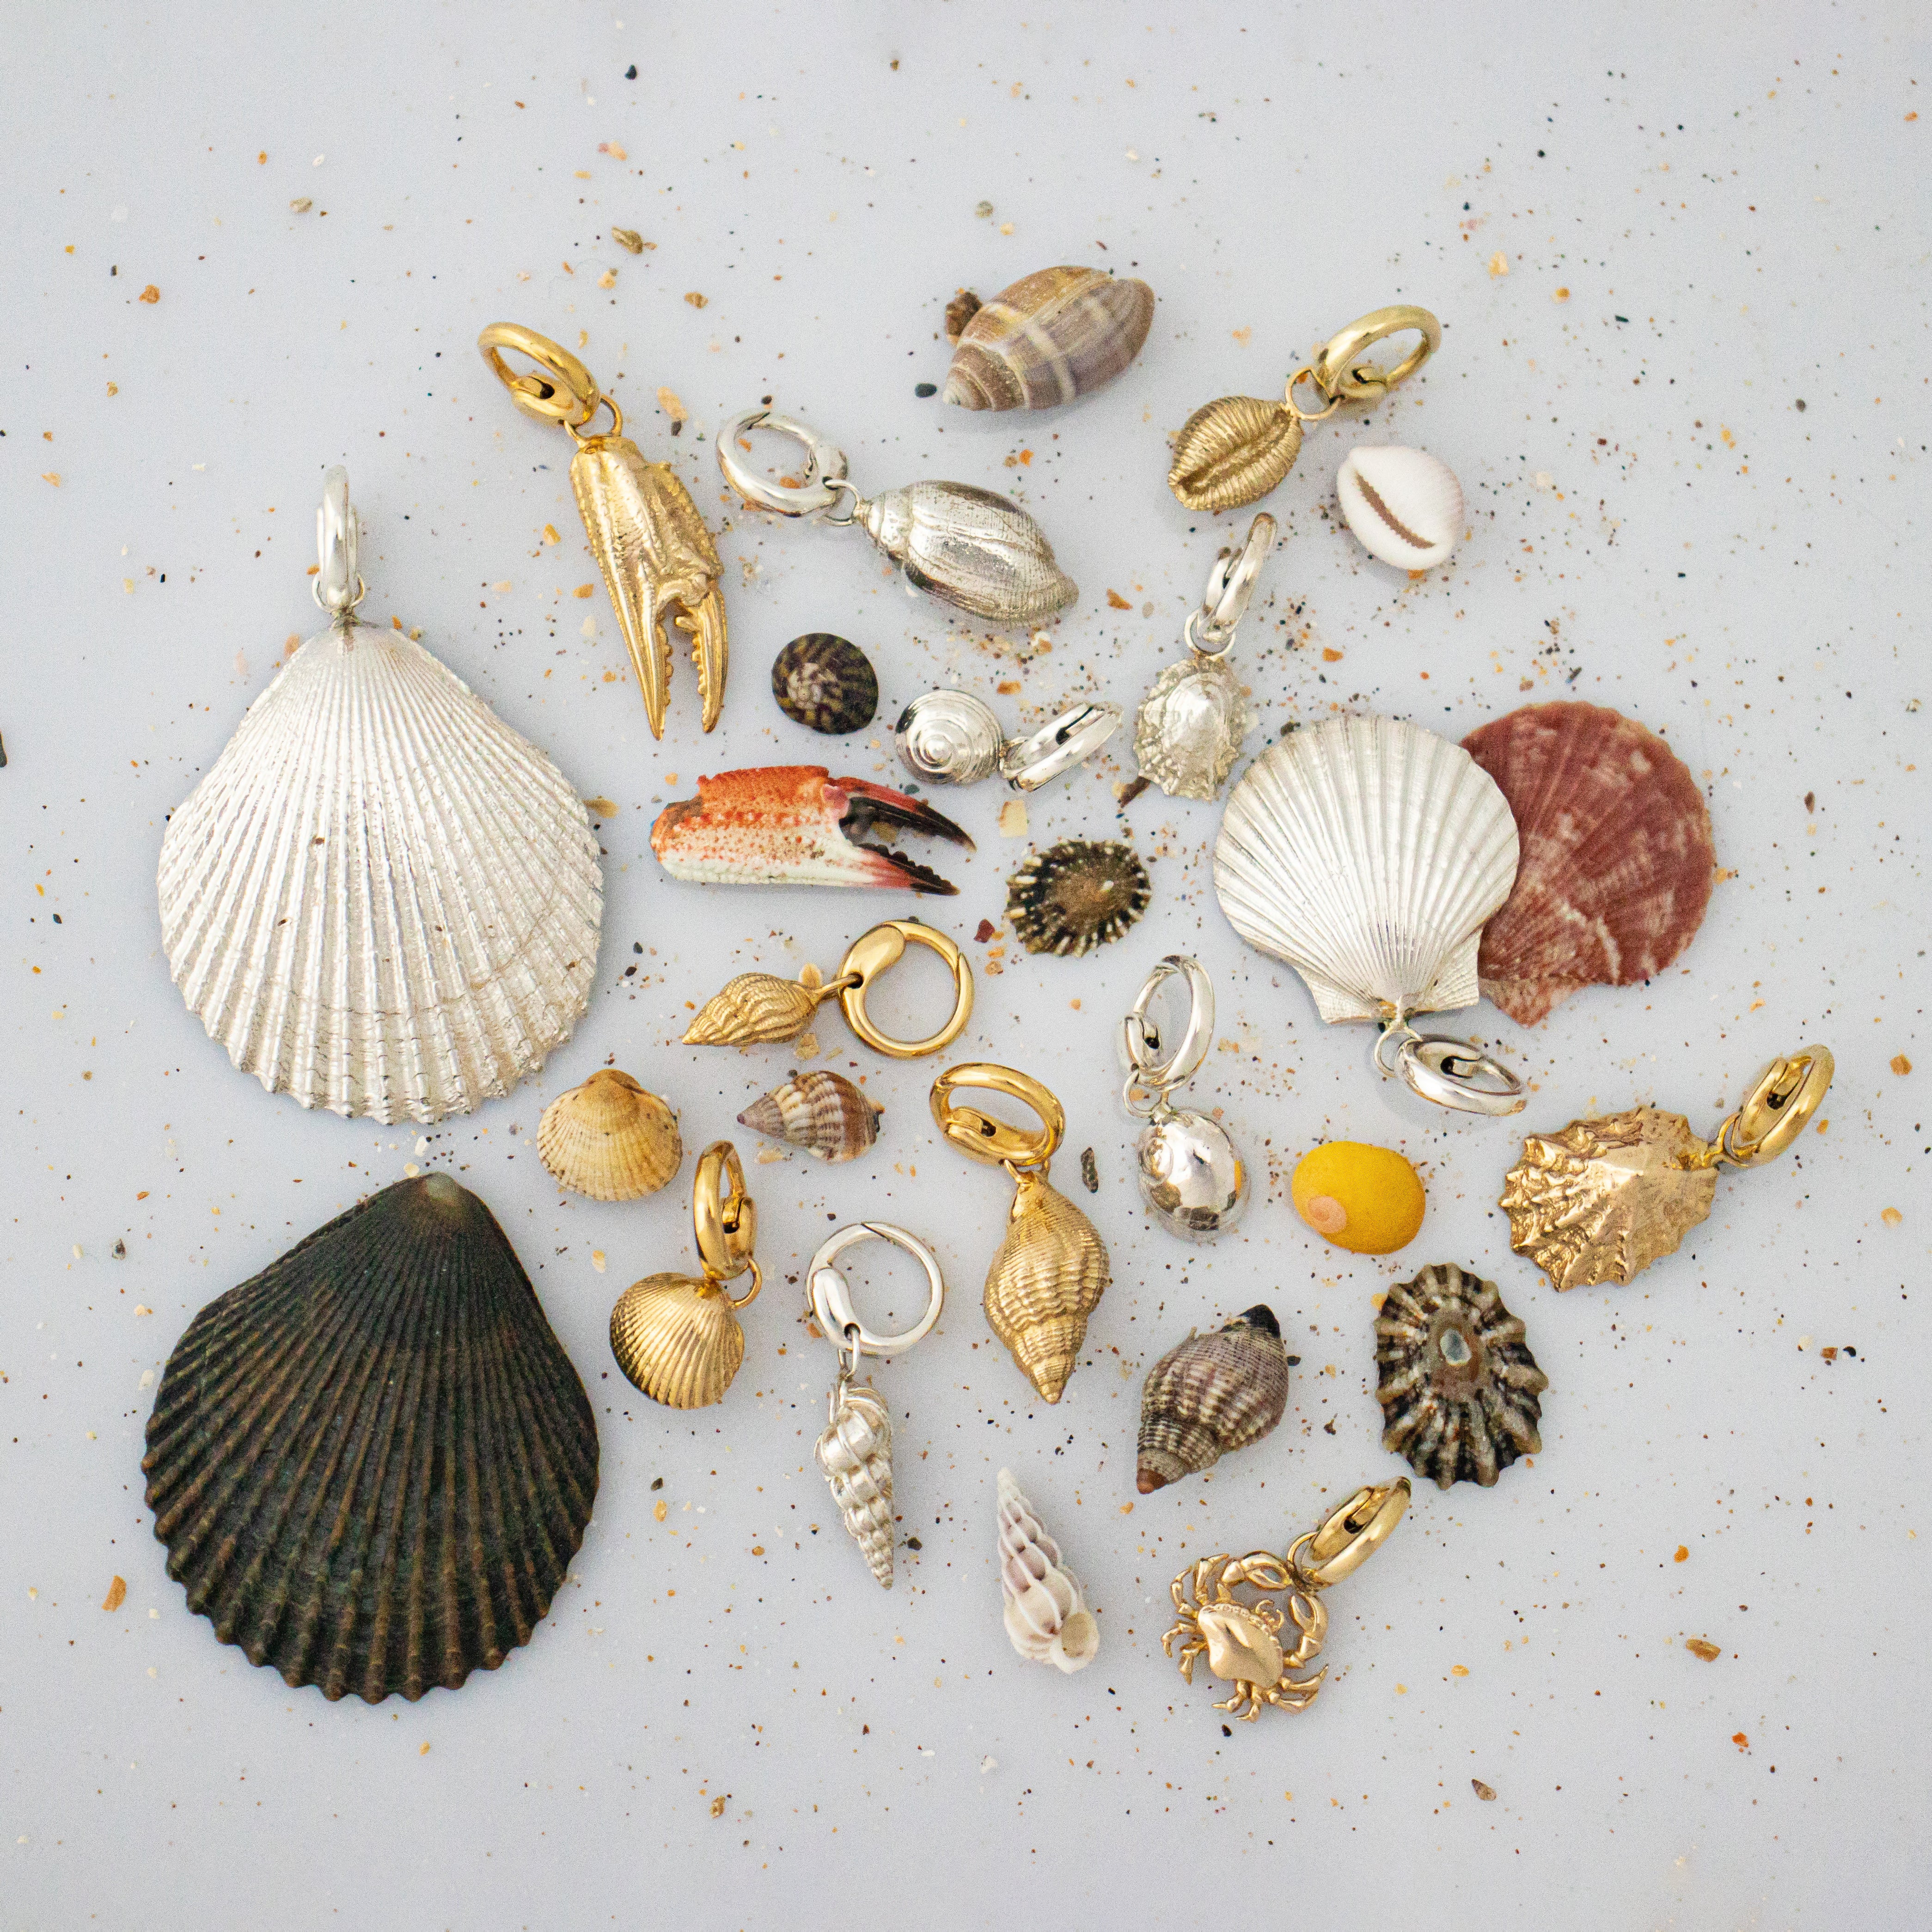 Port Isaac earrings. Port Isaac, Cornwall. Cornwall jewellery. Shell earrings. Cornish shell jewellery. Silver shell jewellery. Gold shell jewellery. Those Happy Places. Serena Ansell Jewellery.